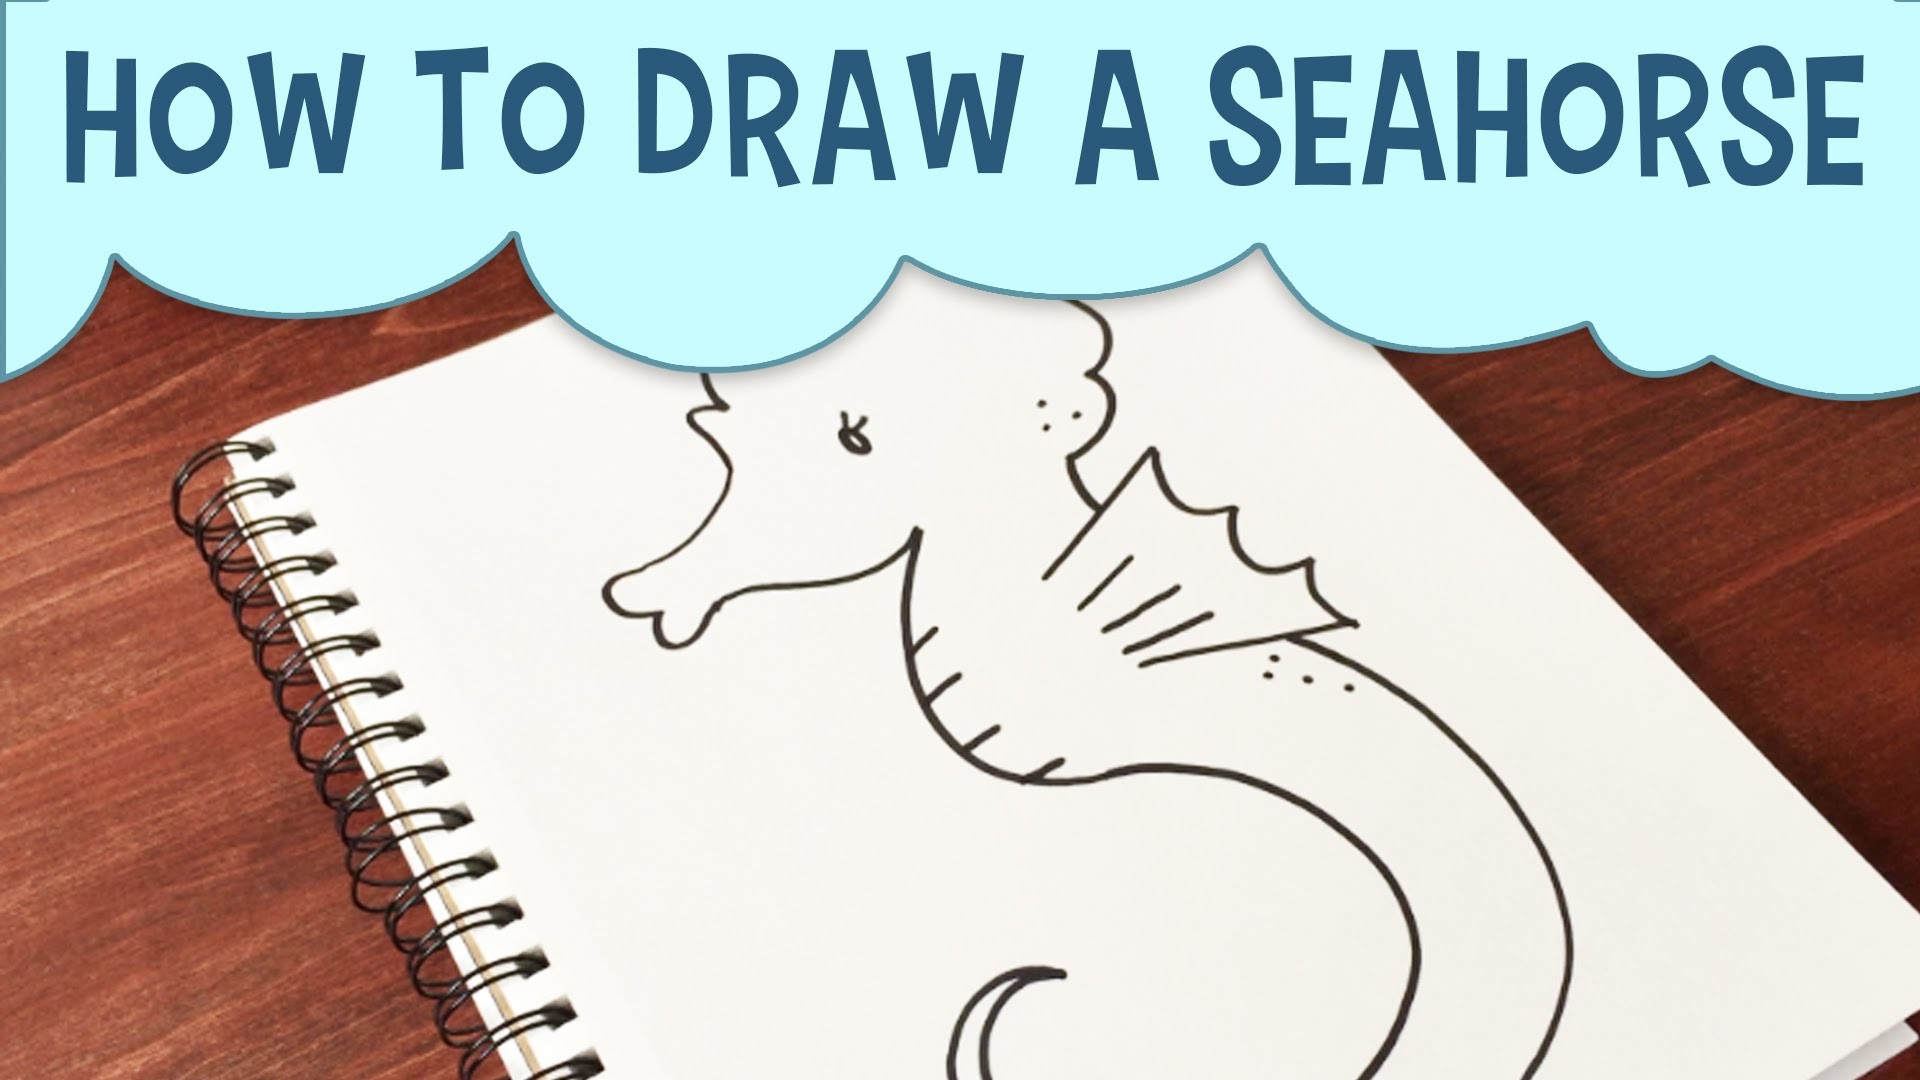 How To Draw A Seahorse For Kids Easy Step By Step Drawing Tutorial